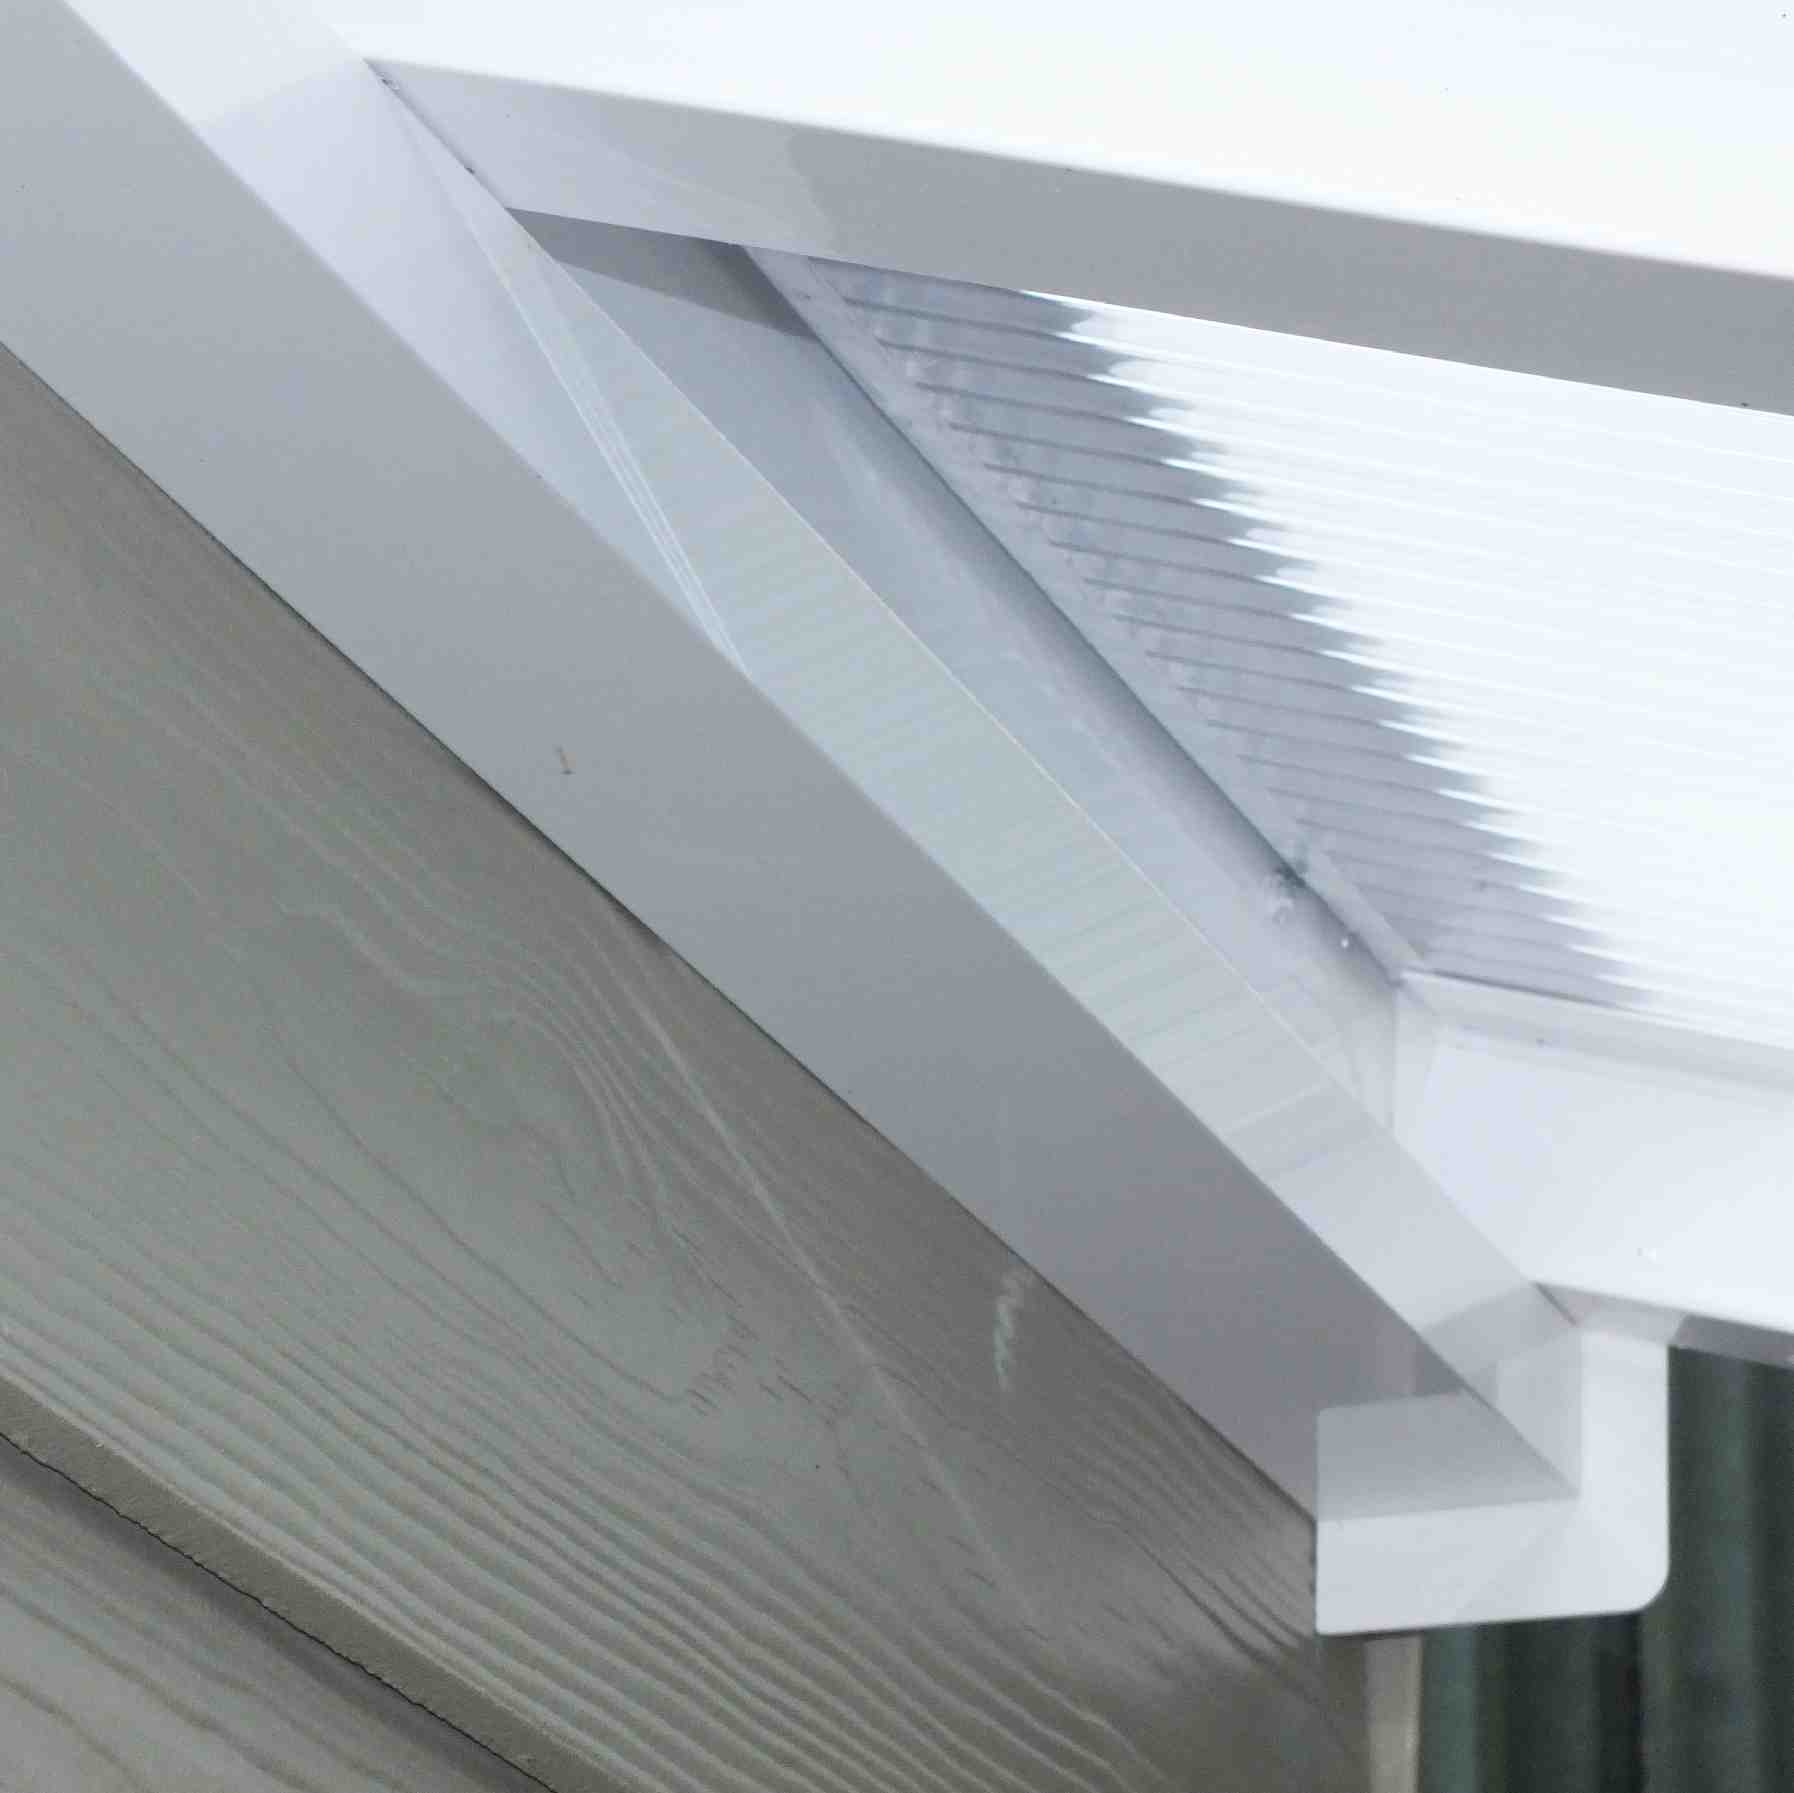 Great deals on Omega Verandah White with 6mm Glass Clear Plate Polycarbonate Glazing - 7.7m (W) x 1.5m (P), (4) Supporting Posts